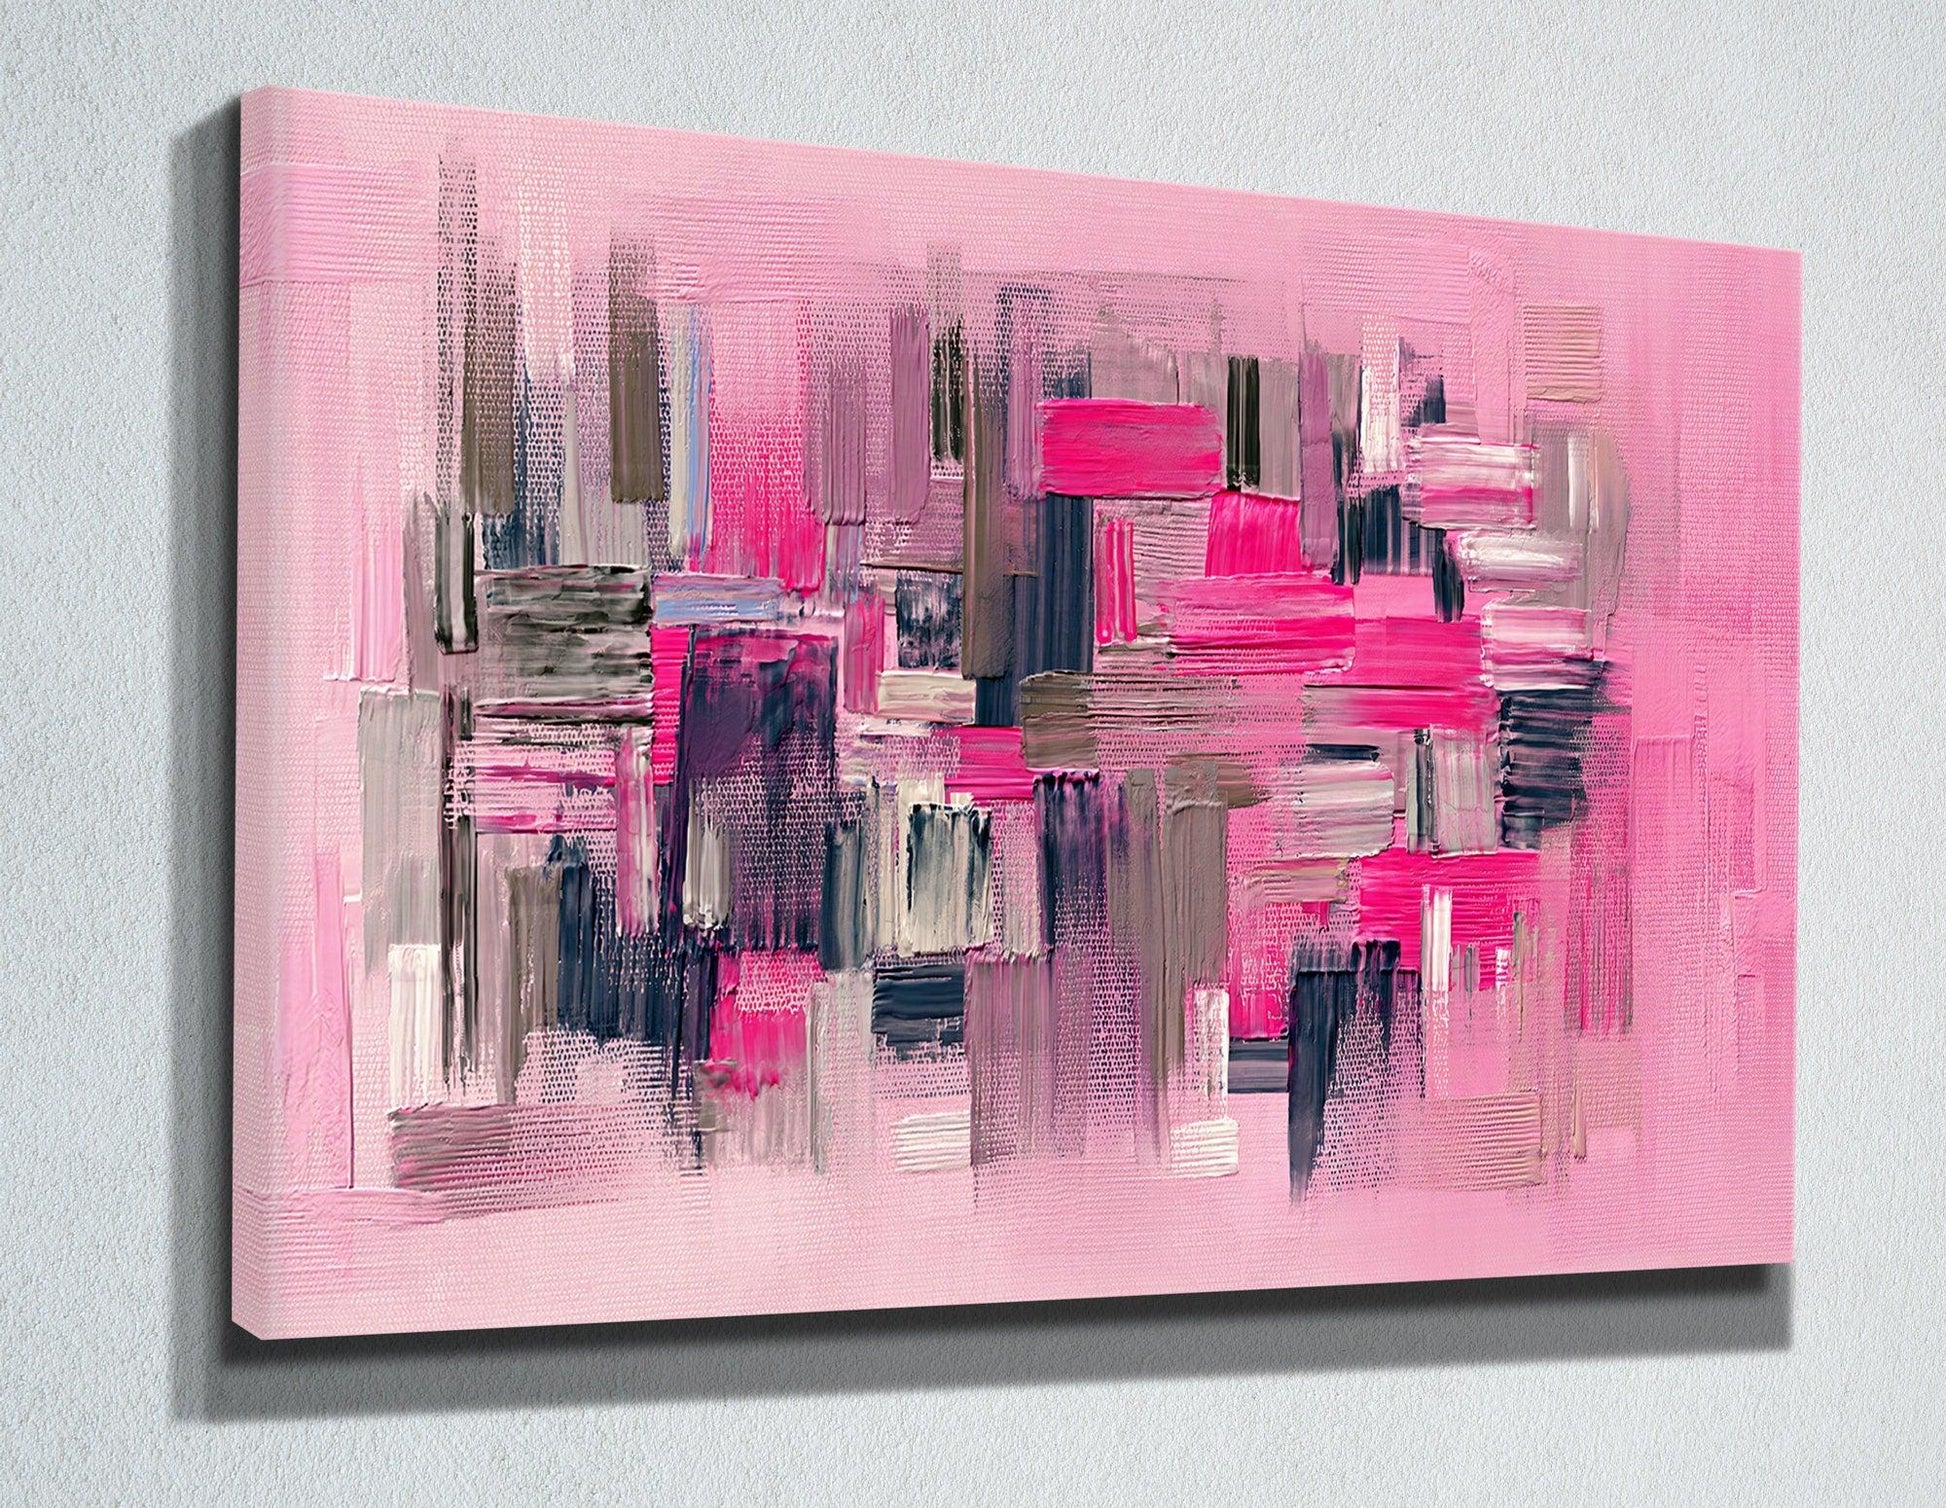 Abstract pink Textured glass wall art |Oil Painting on Canvas, pink Large Original Custom Modern Painting Living Room Wall Art, pink art - TrendiArt